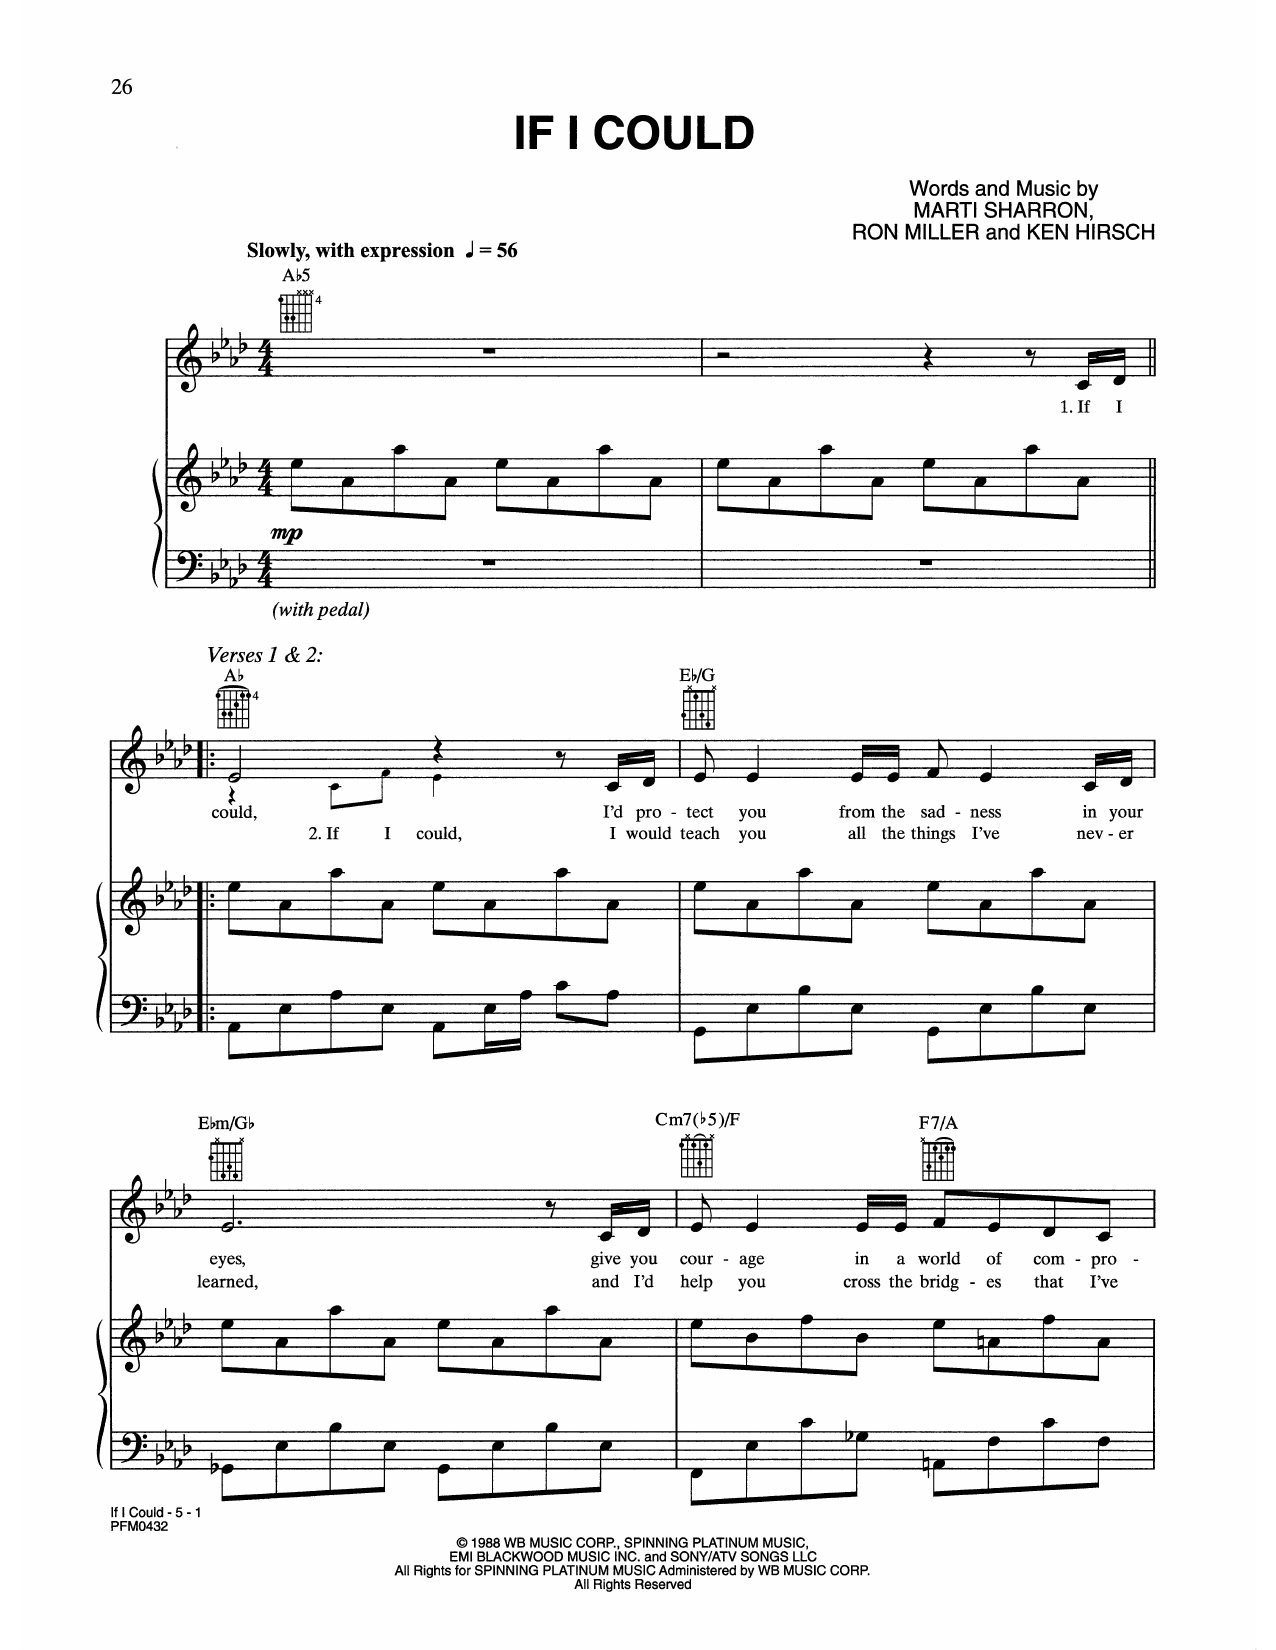 Celine Dion If I Could sheet music notes and chords. Download Printable PDF.